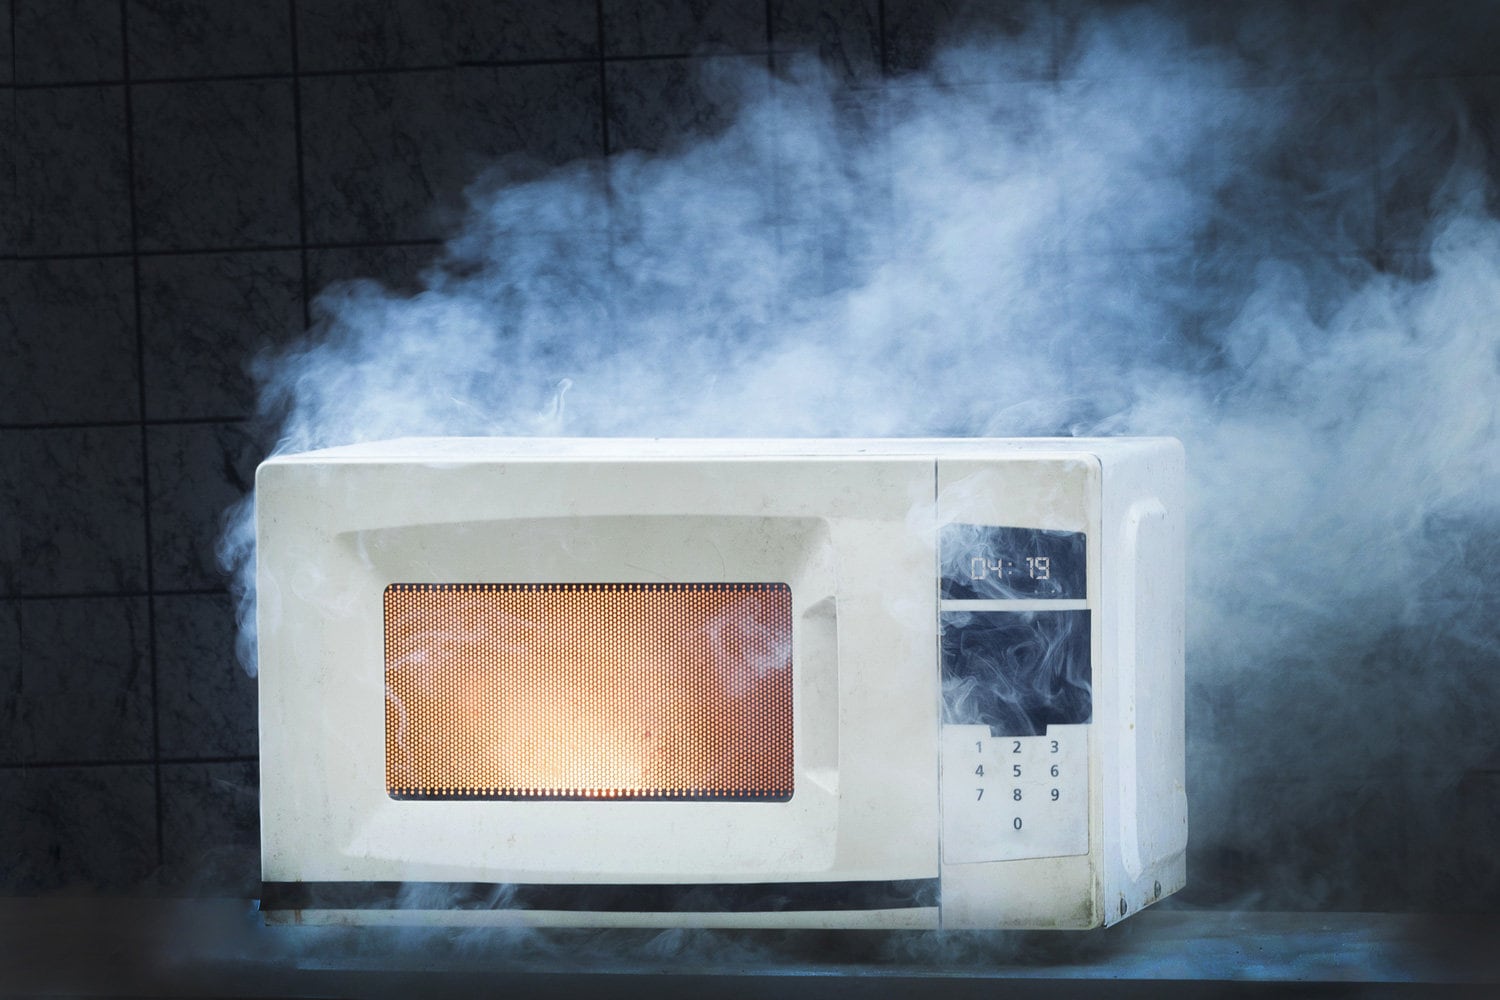 Microwave oven white, in fire front view, electrical appliances caught fire as a result of improper operation